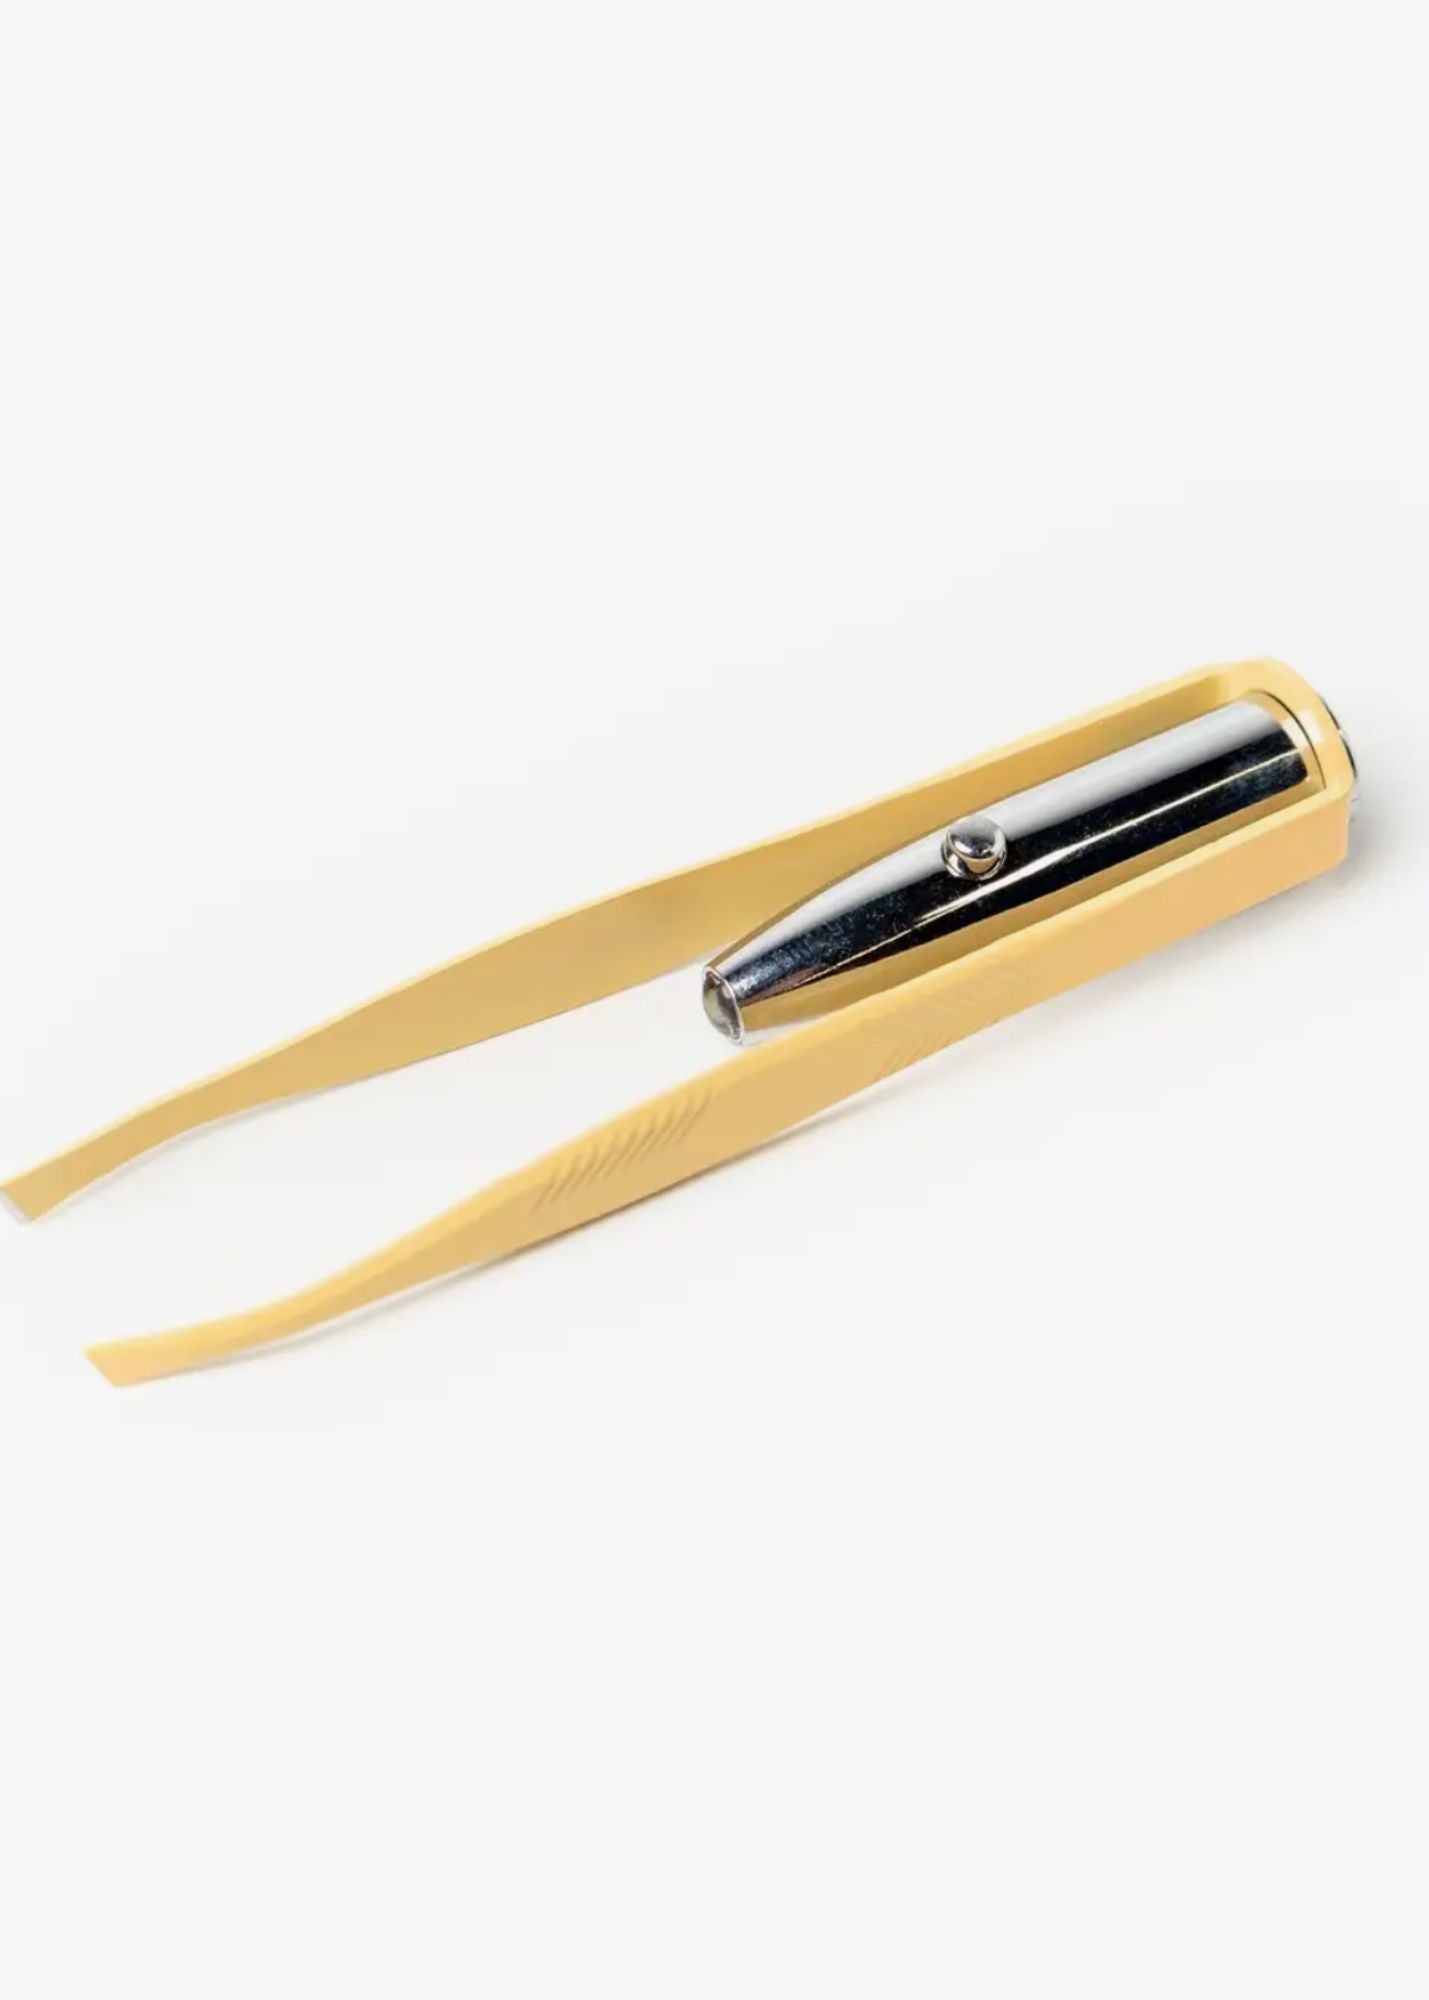 Light Up Stainless Steel Tweezers Gifts Yellow